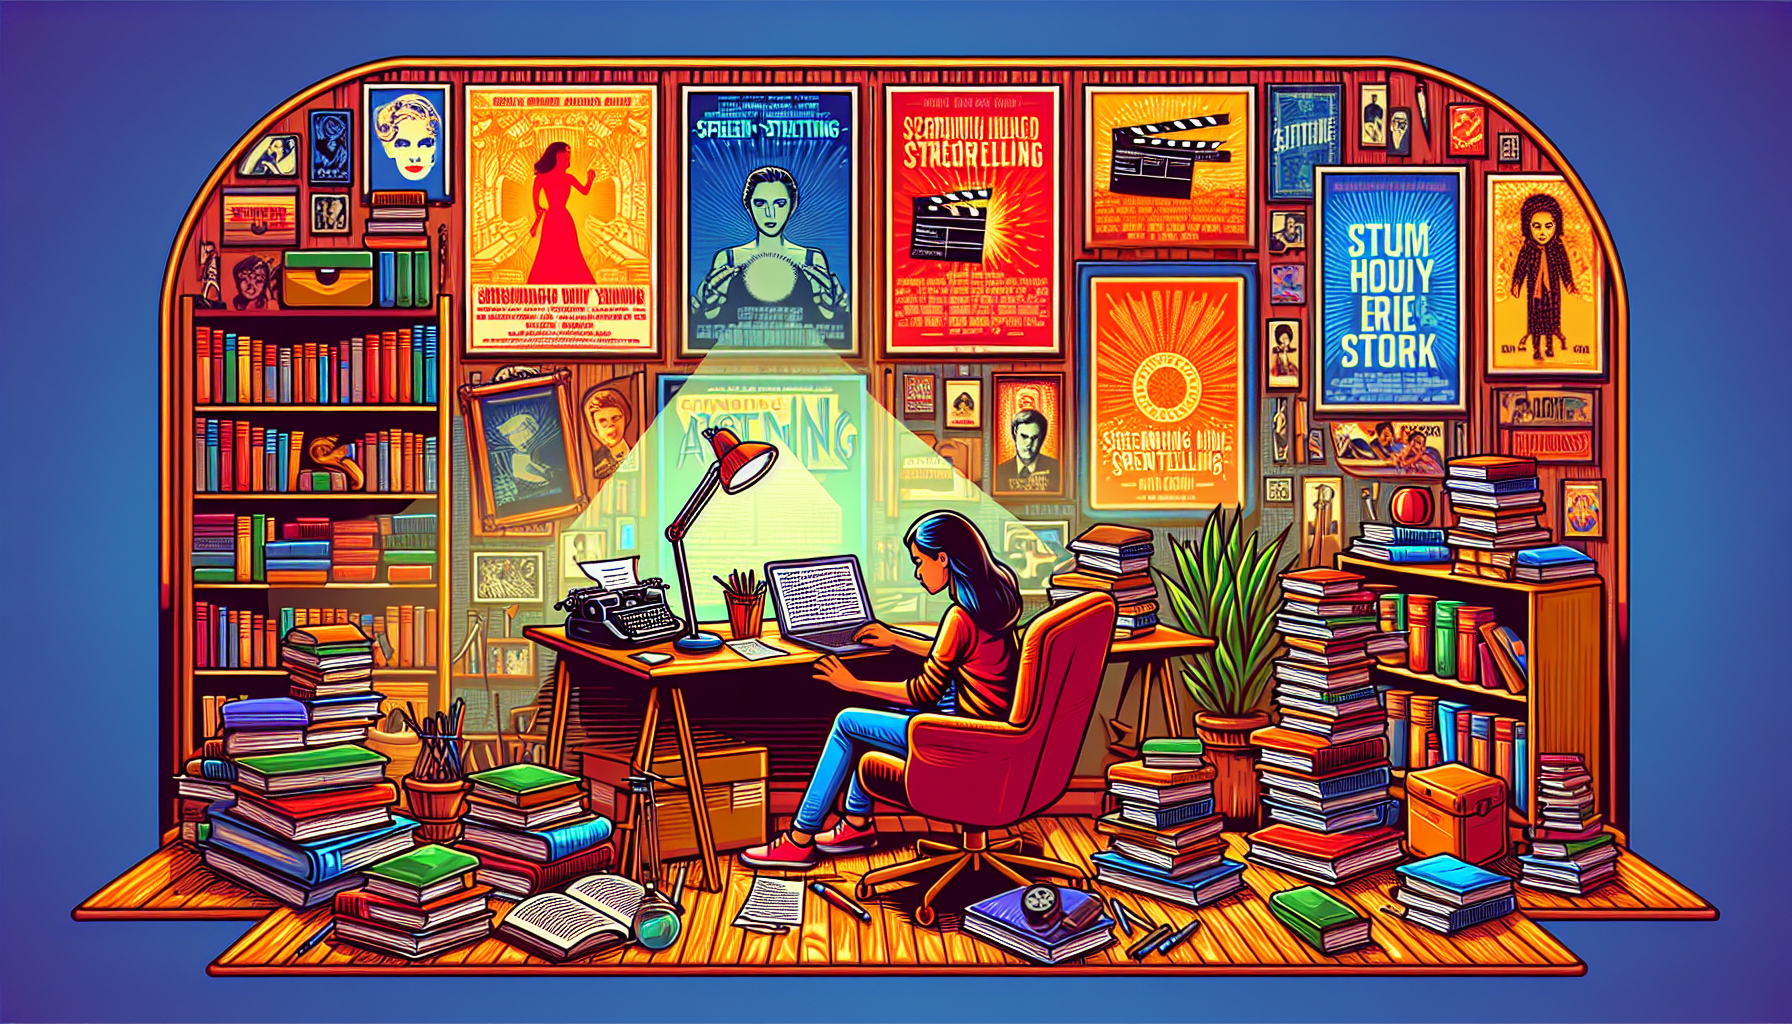 Create a detailed illustration of a cozy writer's room filled with scripts and film memorabilia. In the center, a screenwriter is intently typing on a laptop, surrounded by stacks of books on storytelling and movie posters from iconic films. The walls are adorned with motivational quotes about writing and storytelling. Light from a vintage desk lamp casts a warm glow, highlighting the creative energy in the room.